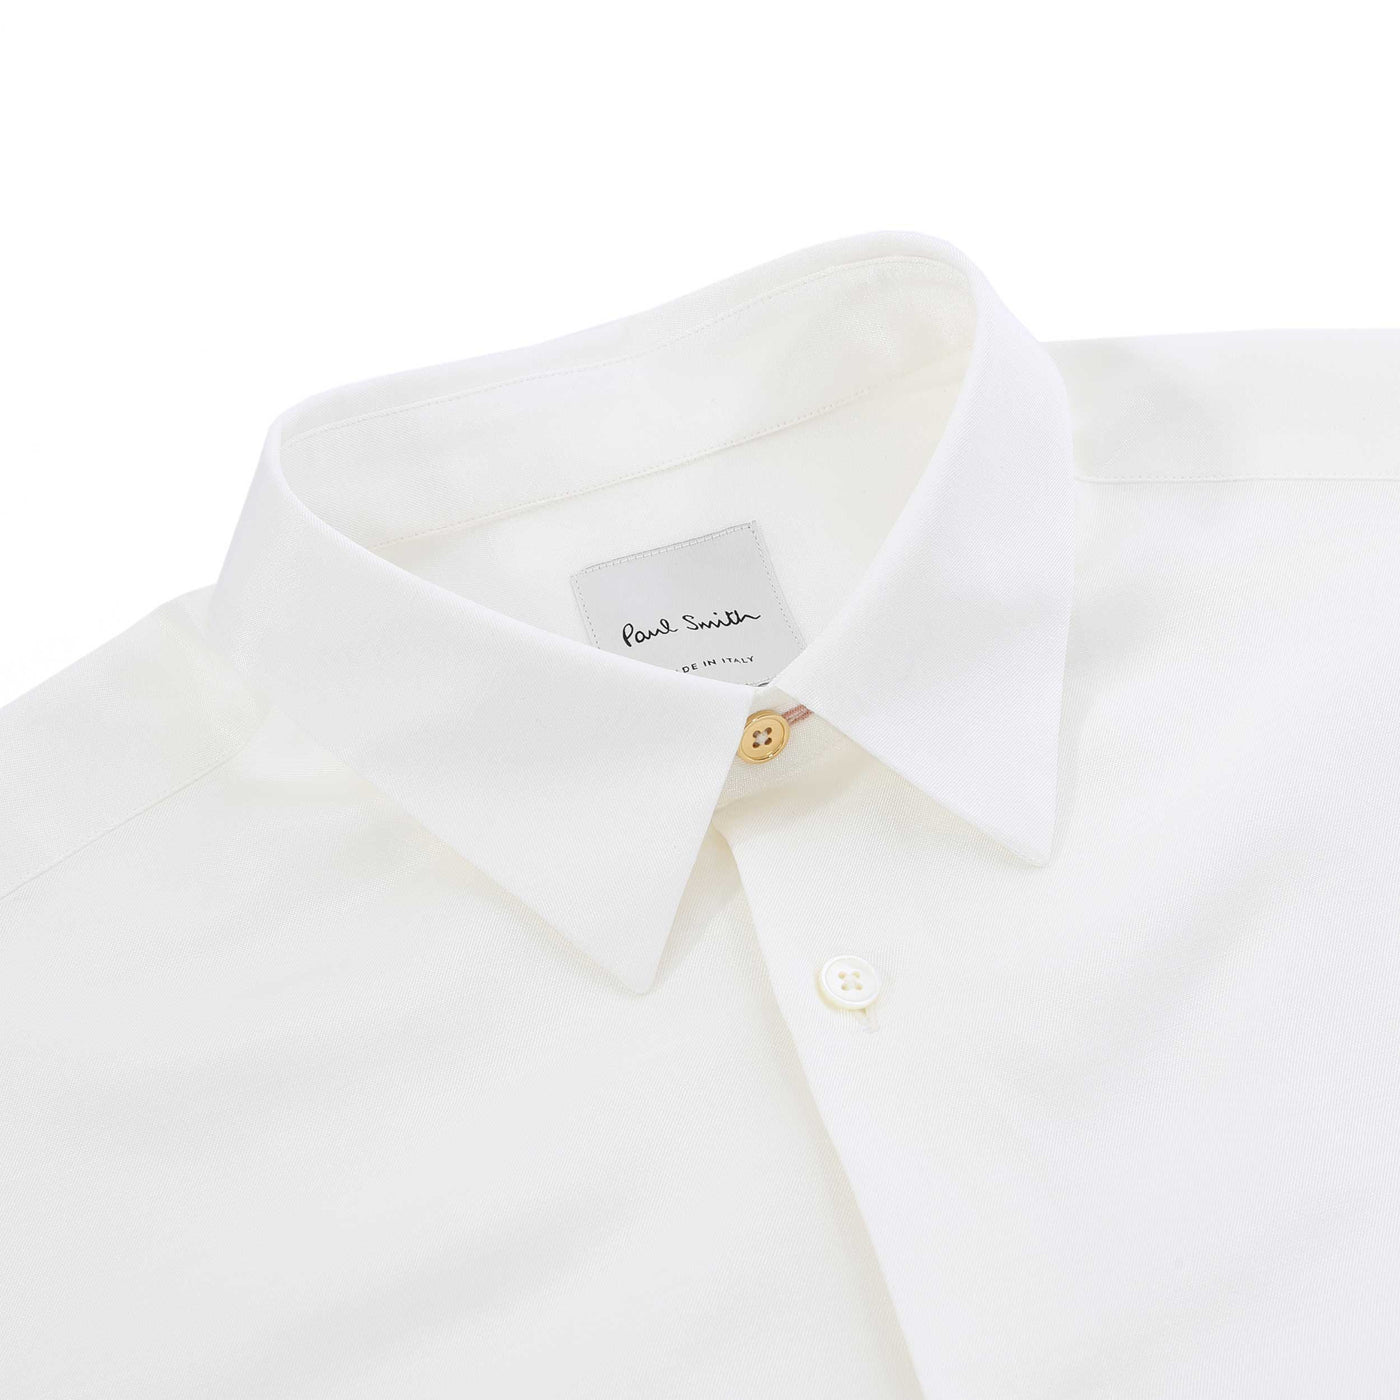 Paul Smith Slim Fit Shirt in Ivory Collar